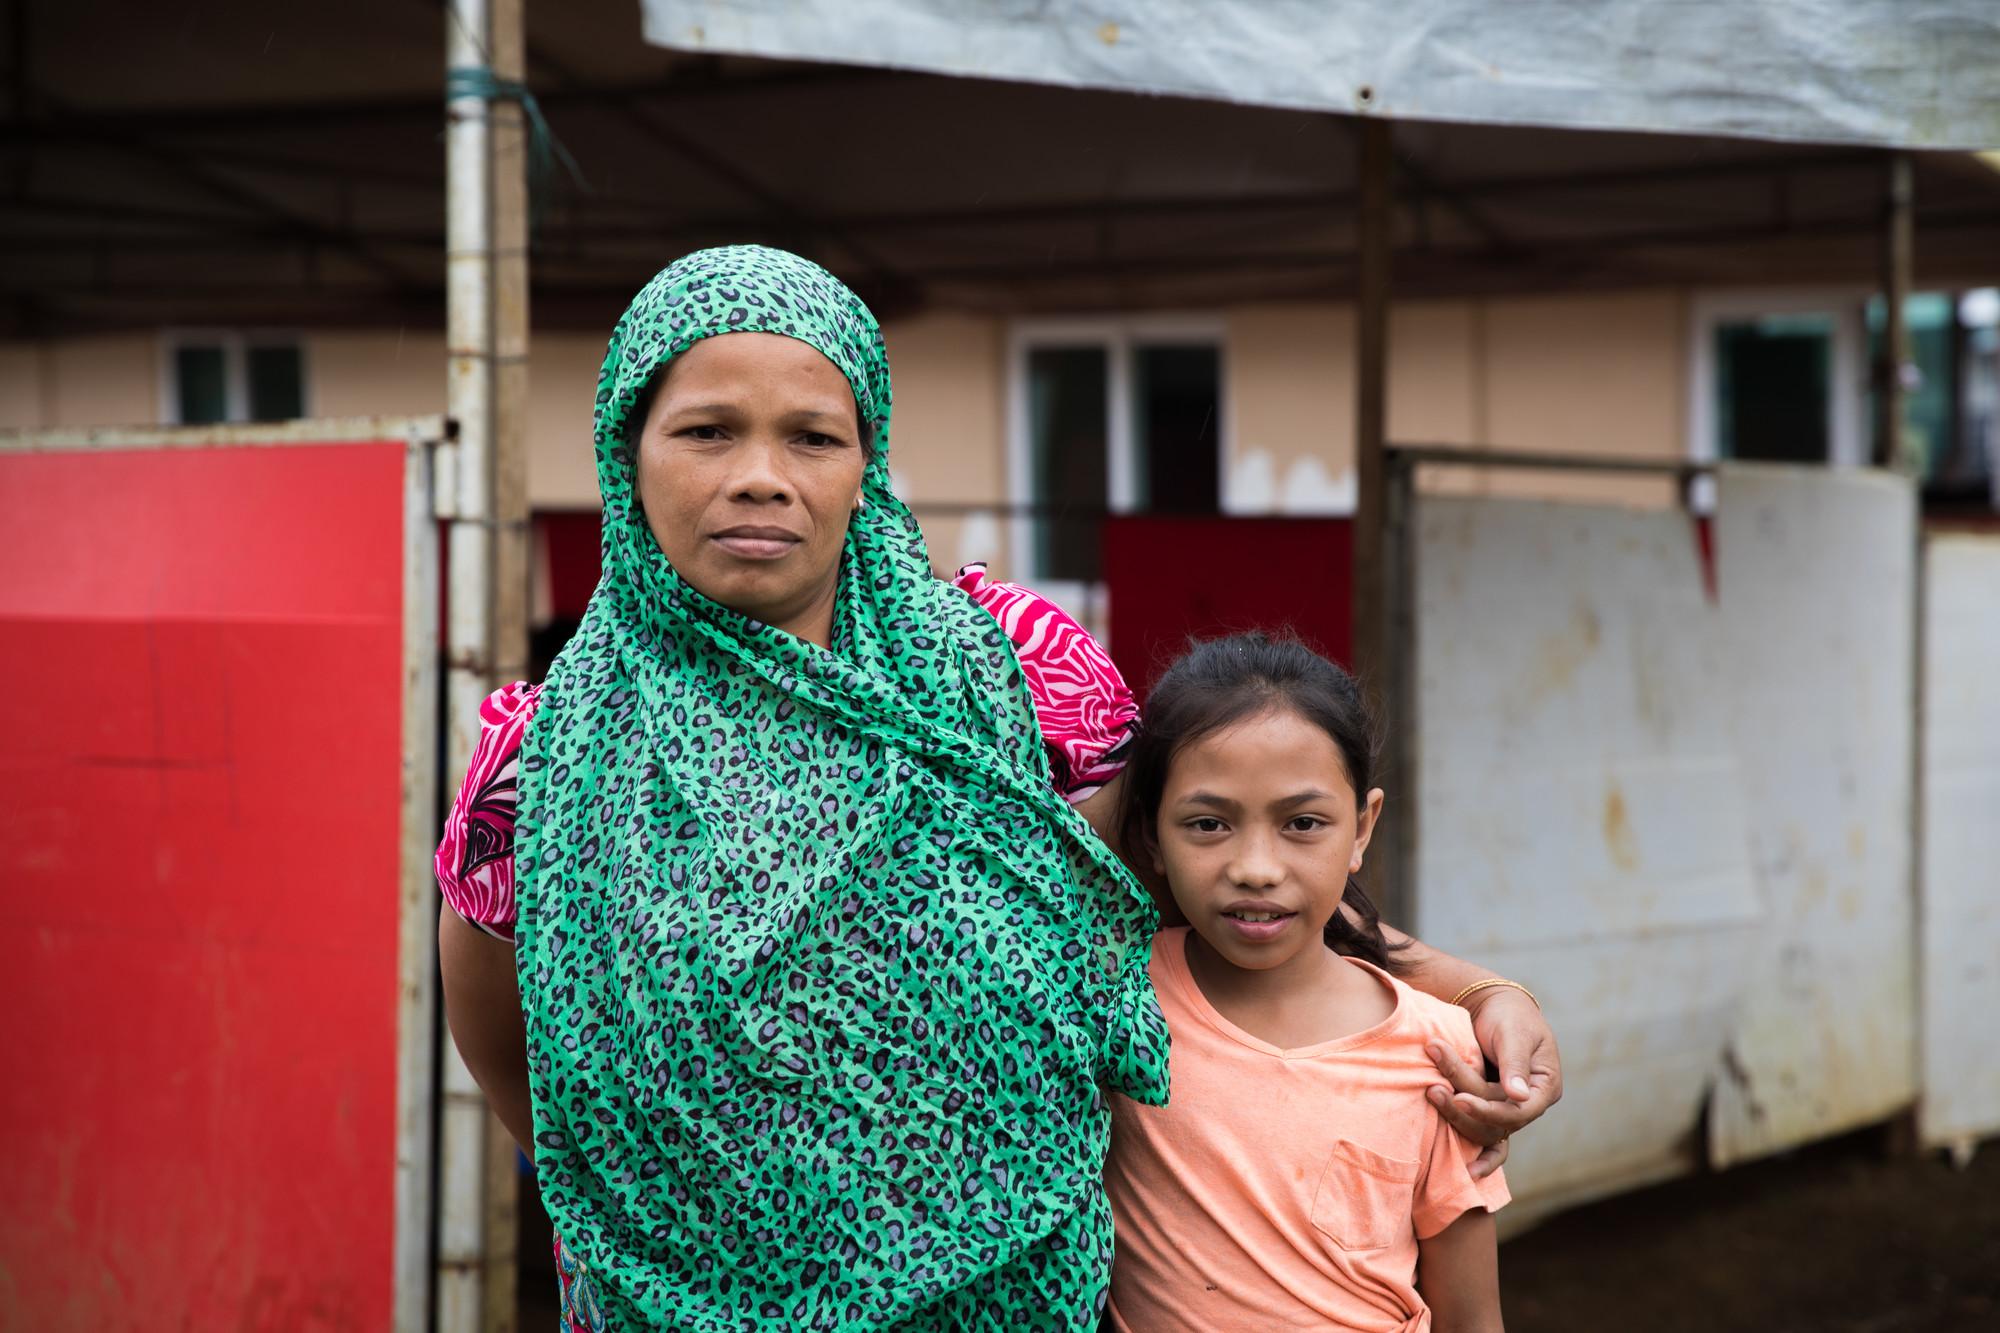 Vilma, 38, and her 10 year-old daughter Aisah stand outside a Save the Children temporary learning centre near Marawi